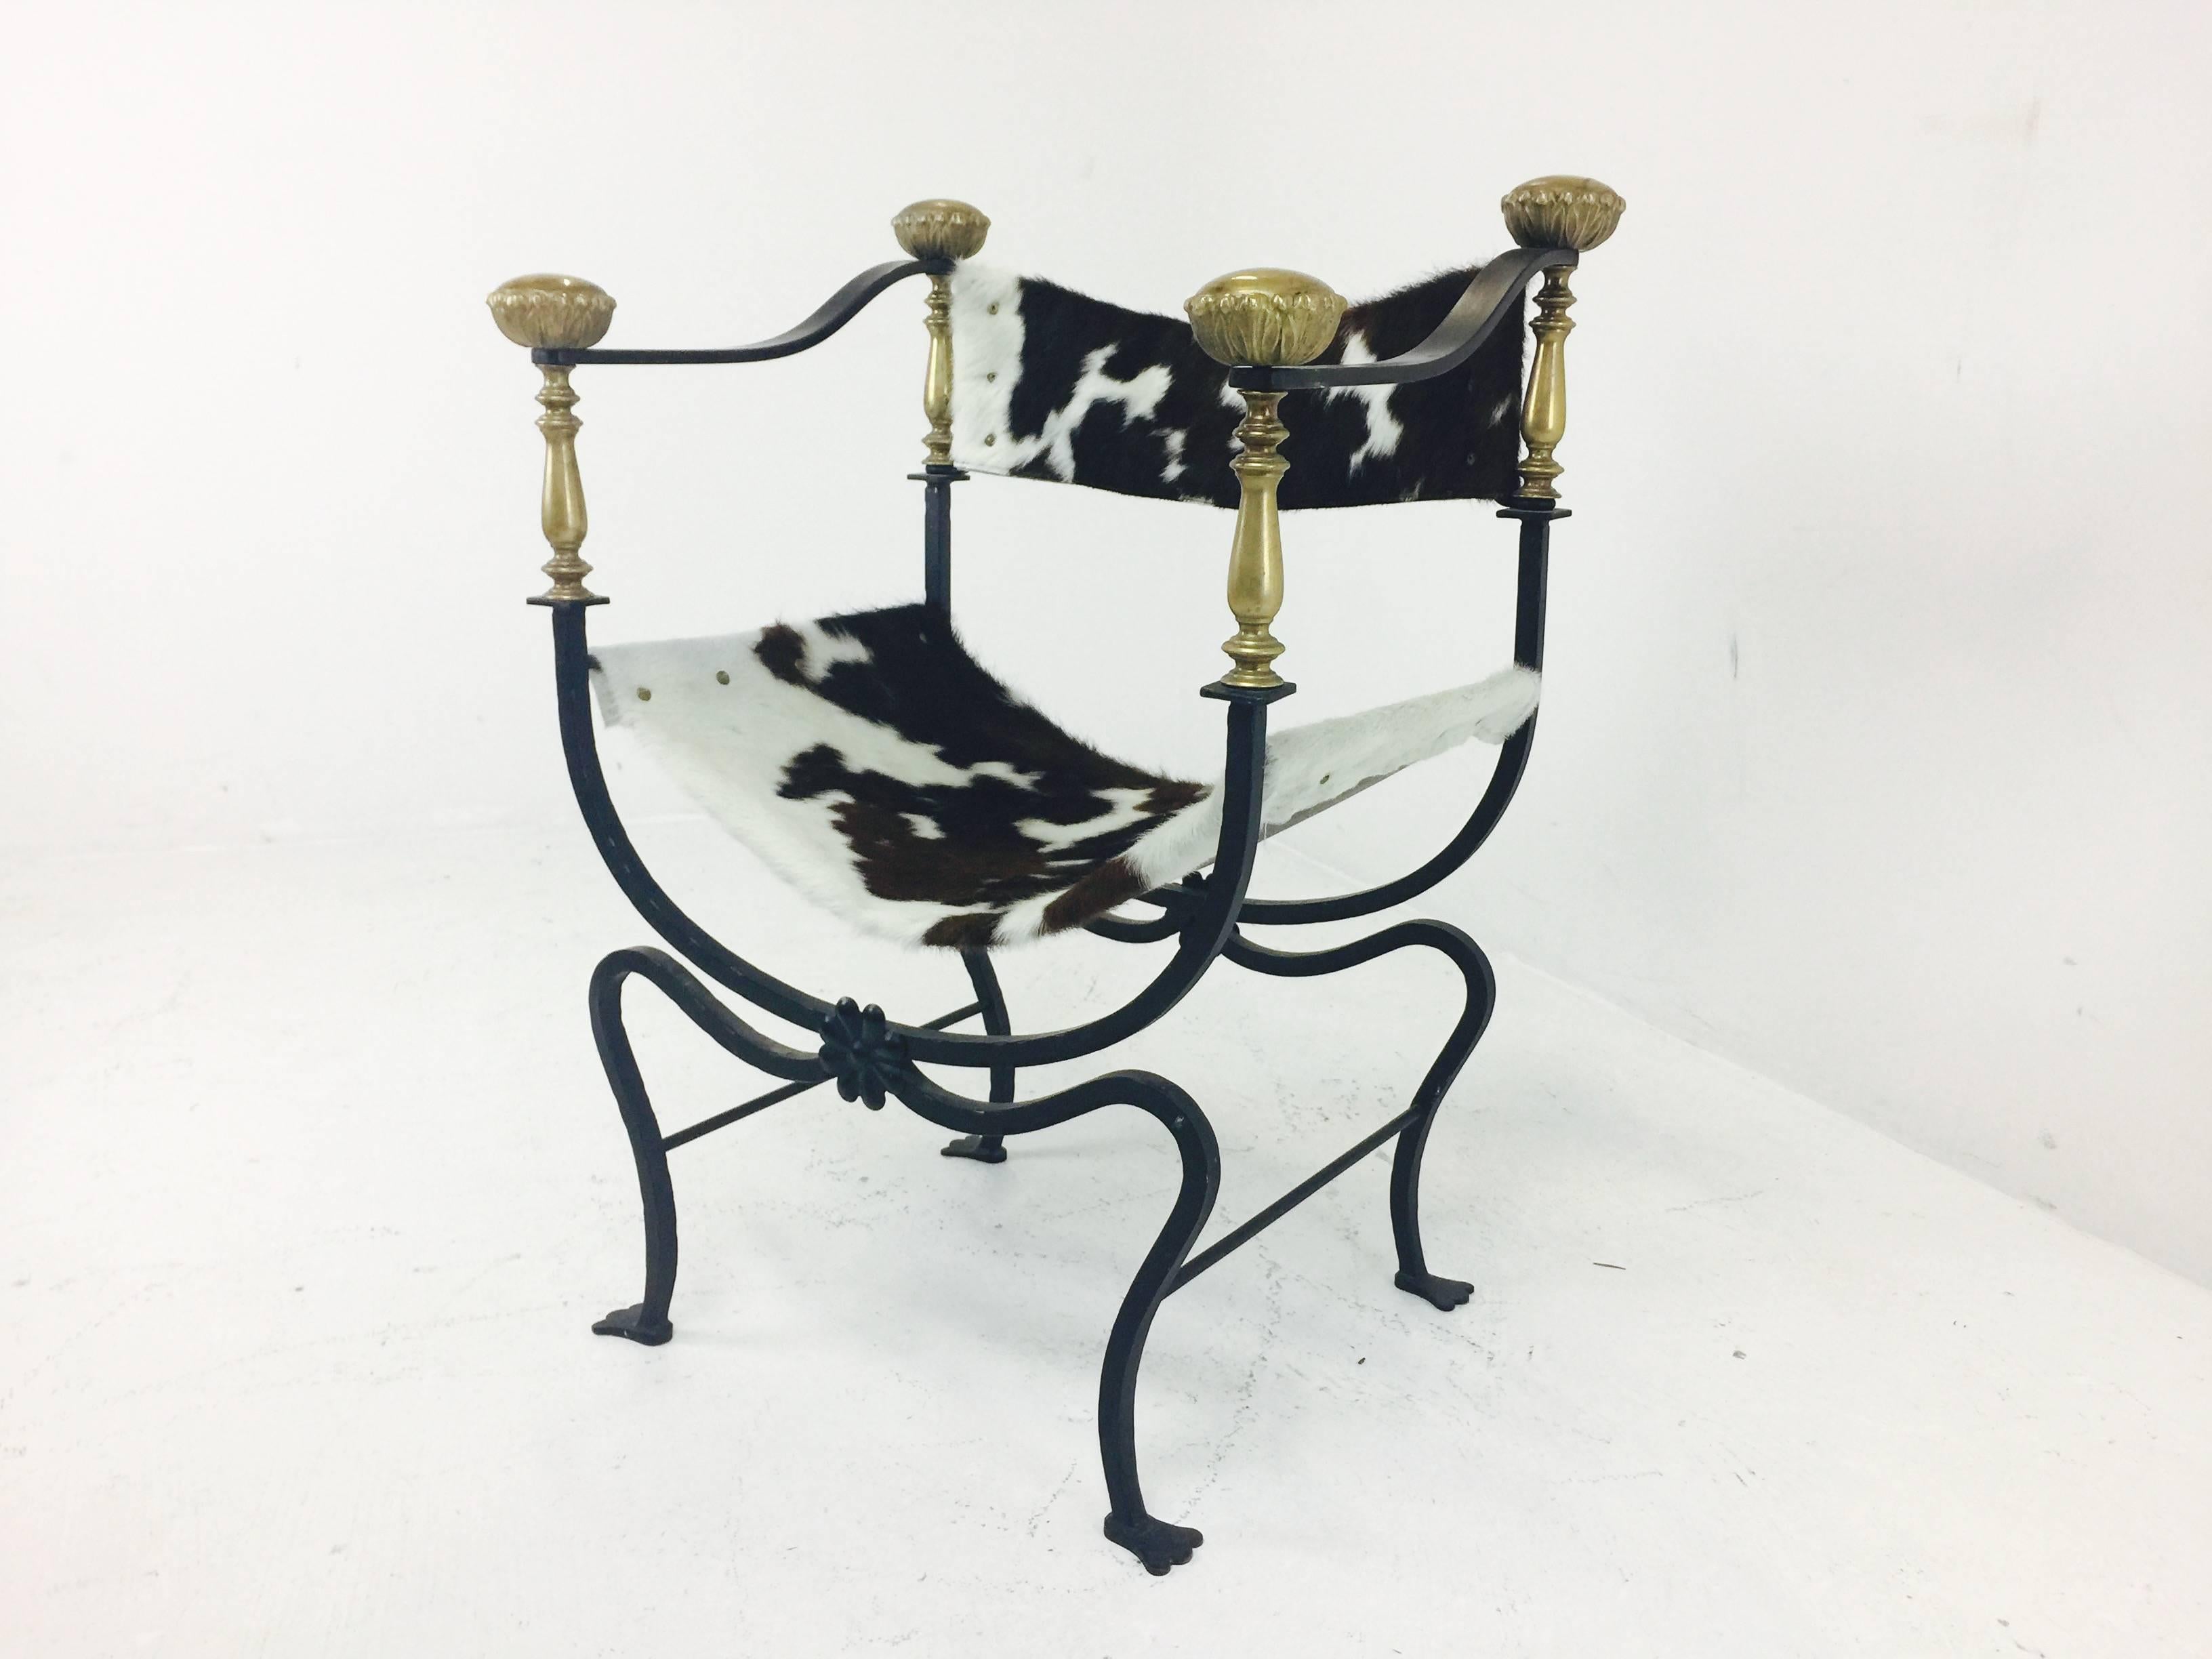 Italian Campaign style iron cowhide chair. New cowhide was recently added.
Brass has a nice aged patina, circa 1960s.

Dimensions: 23.5" W x 19" D x 31" T.
Seat height 14".